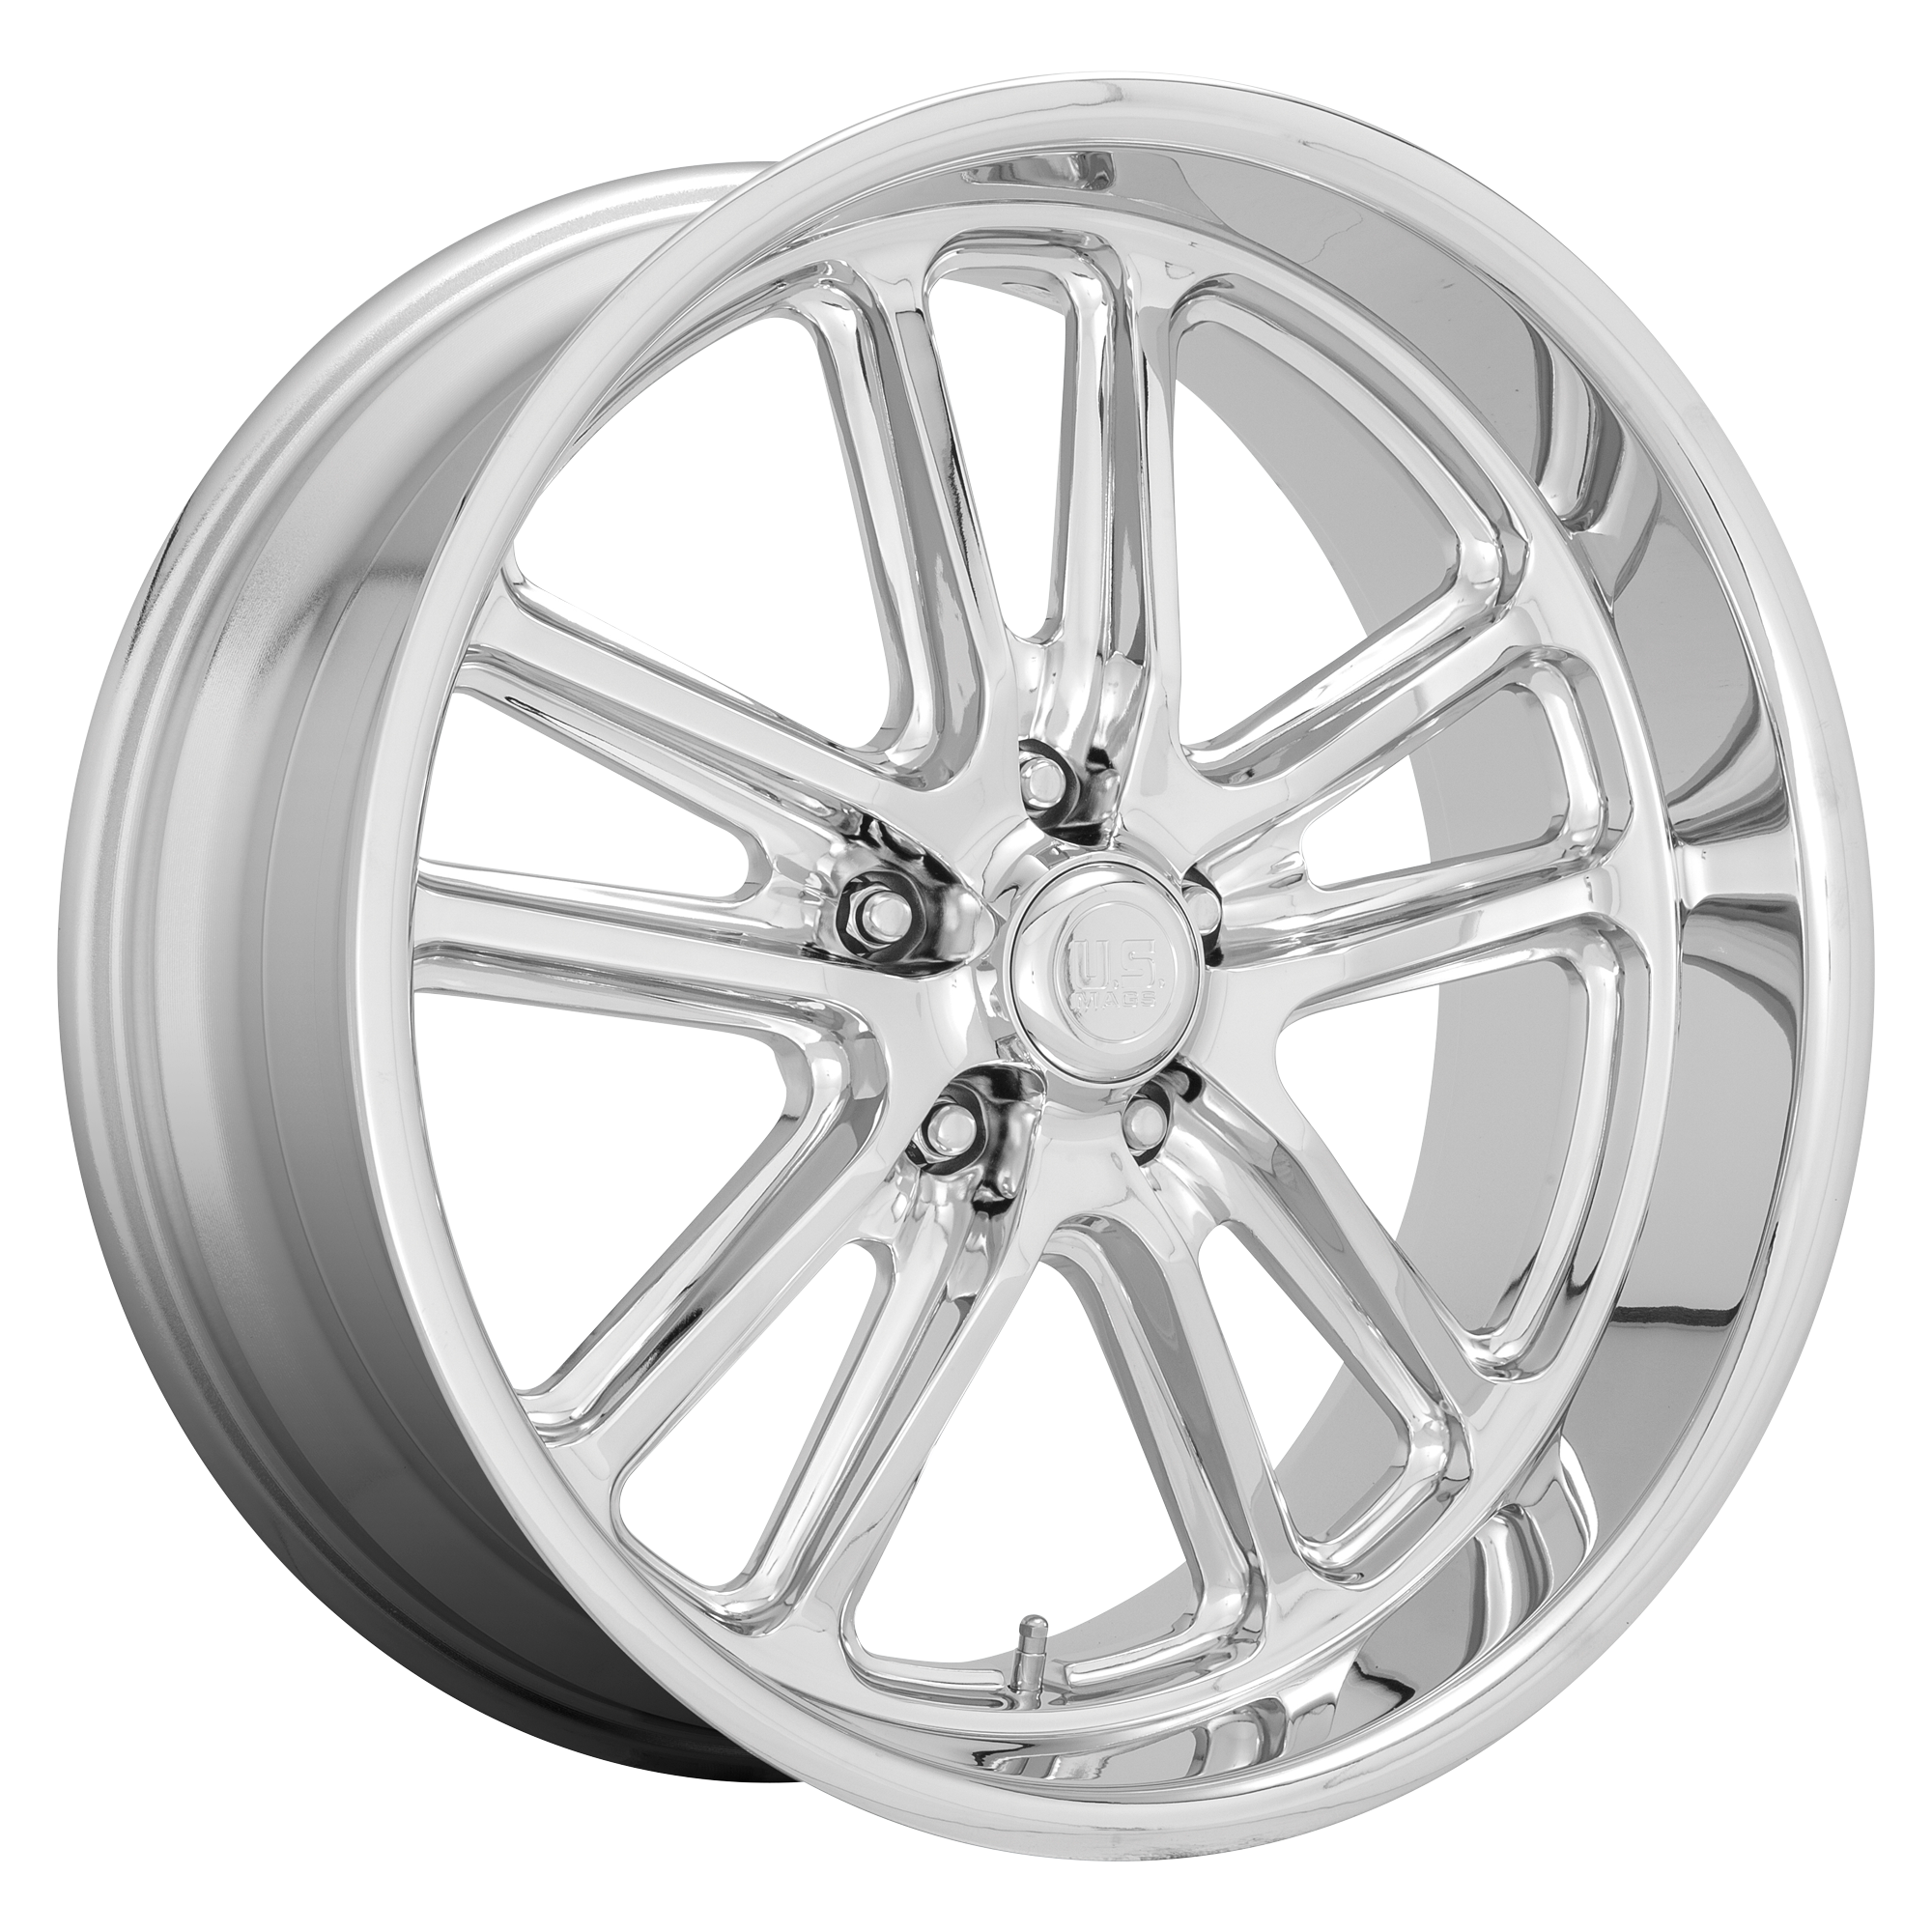 BULLET 20x8 5x127.00 CHROME (1 mm) - Tires and Engine Performance